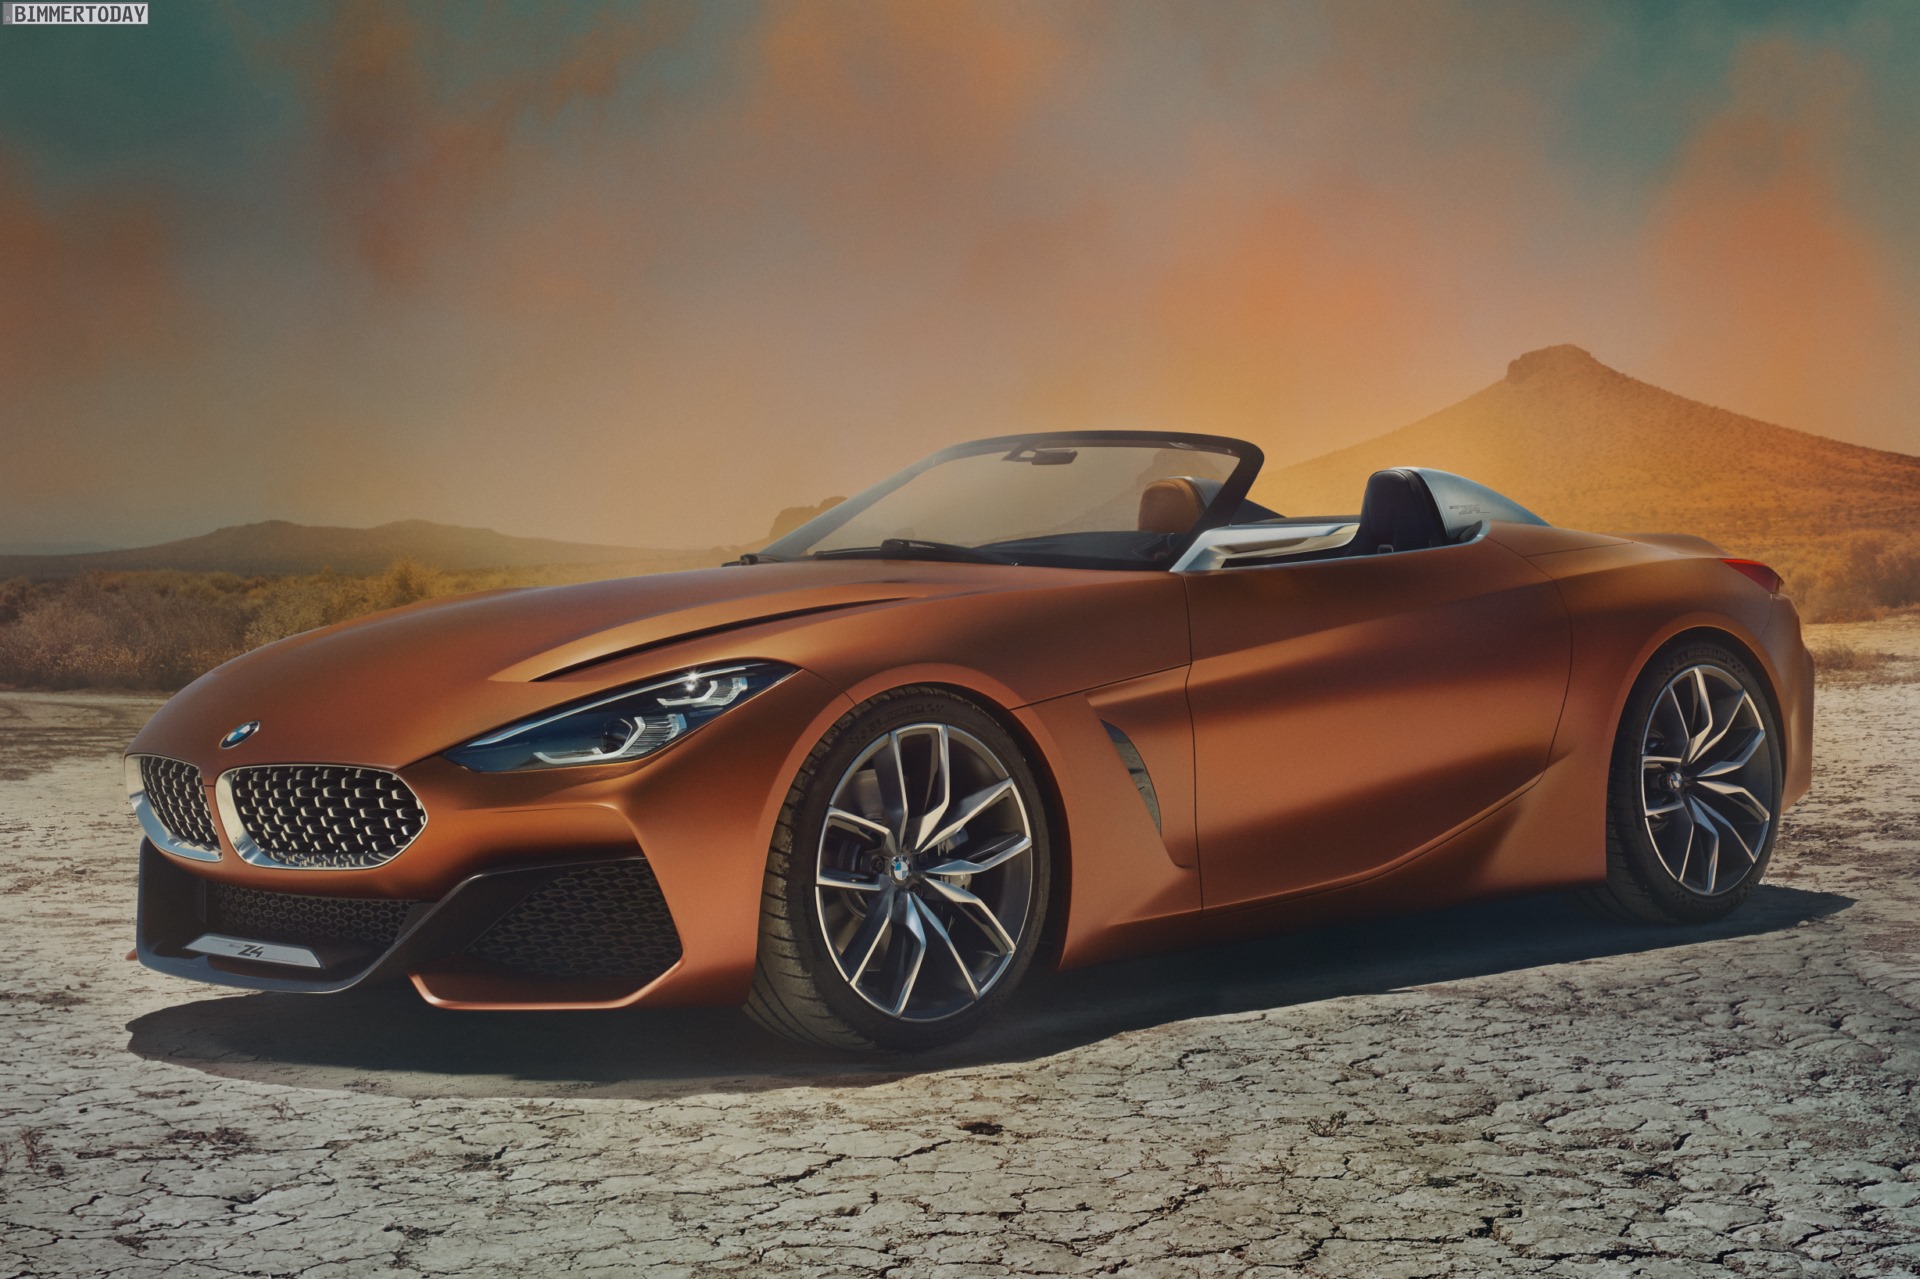 The Future Of Luxury: The 2017 BMW Z4 Concept